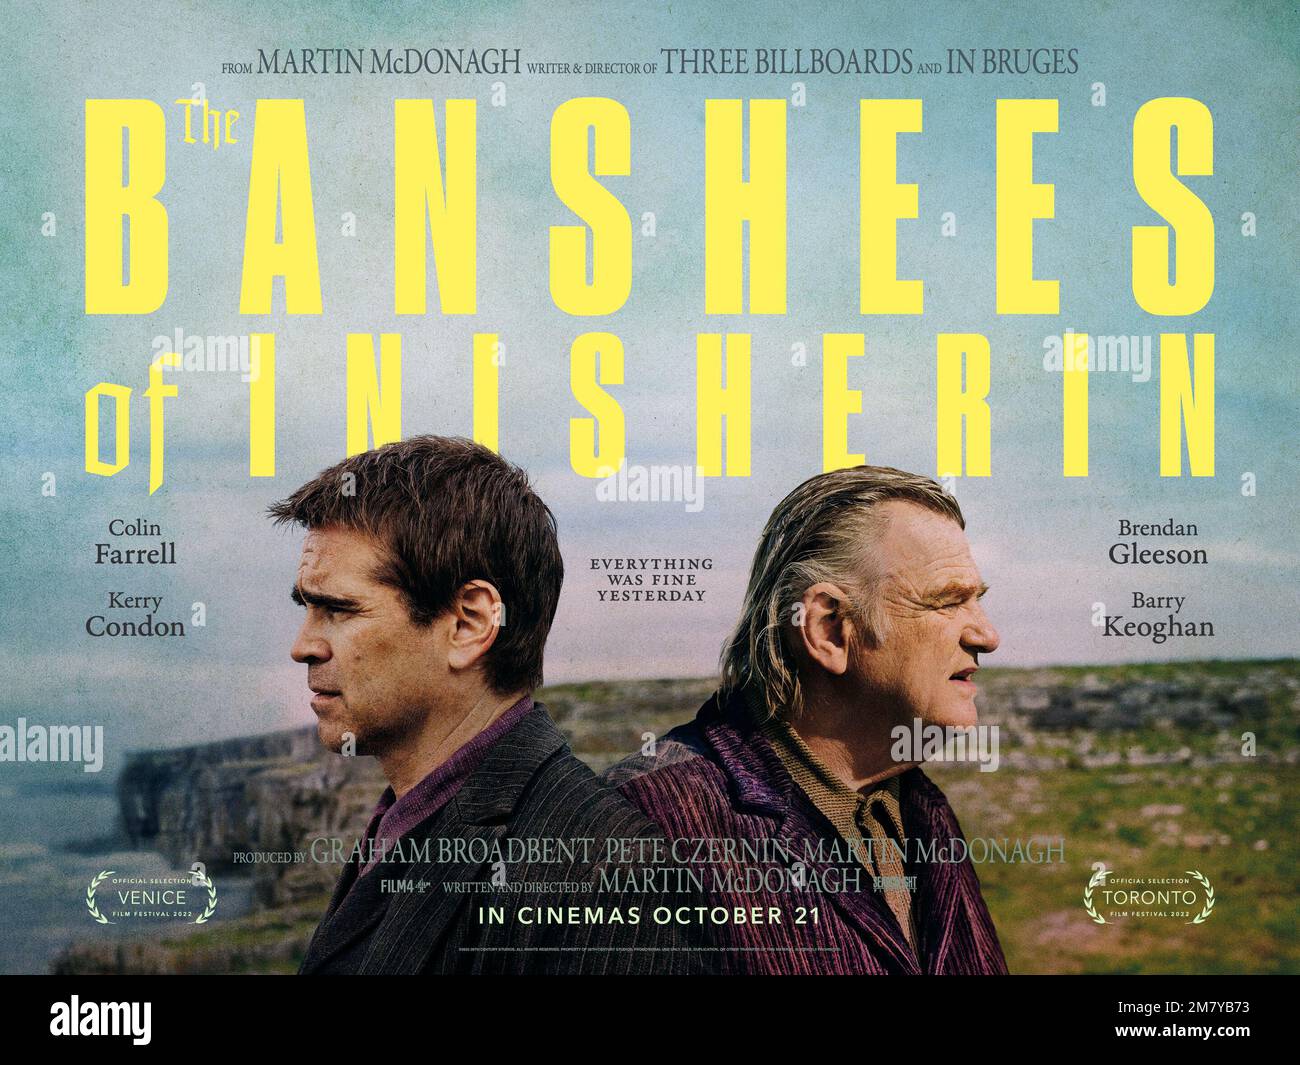 The Banshees of Inisherin film poster Stock Photo